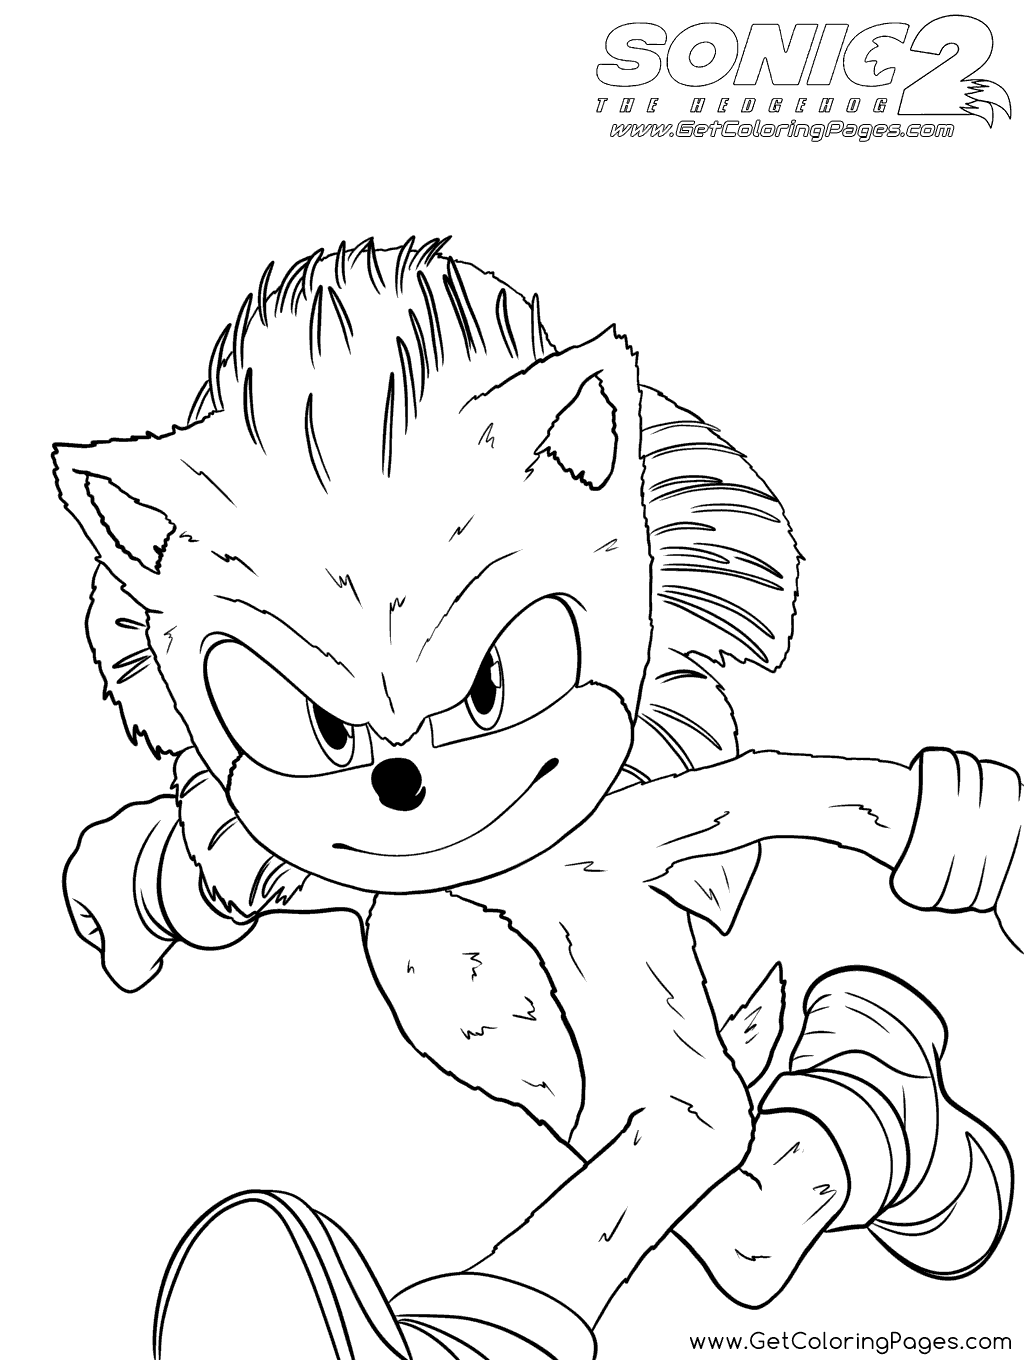 Sonic in Sonic the Hedgehog 2 Coloring Pages - Coloriages Sonic the